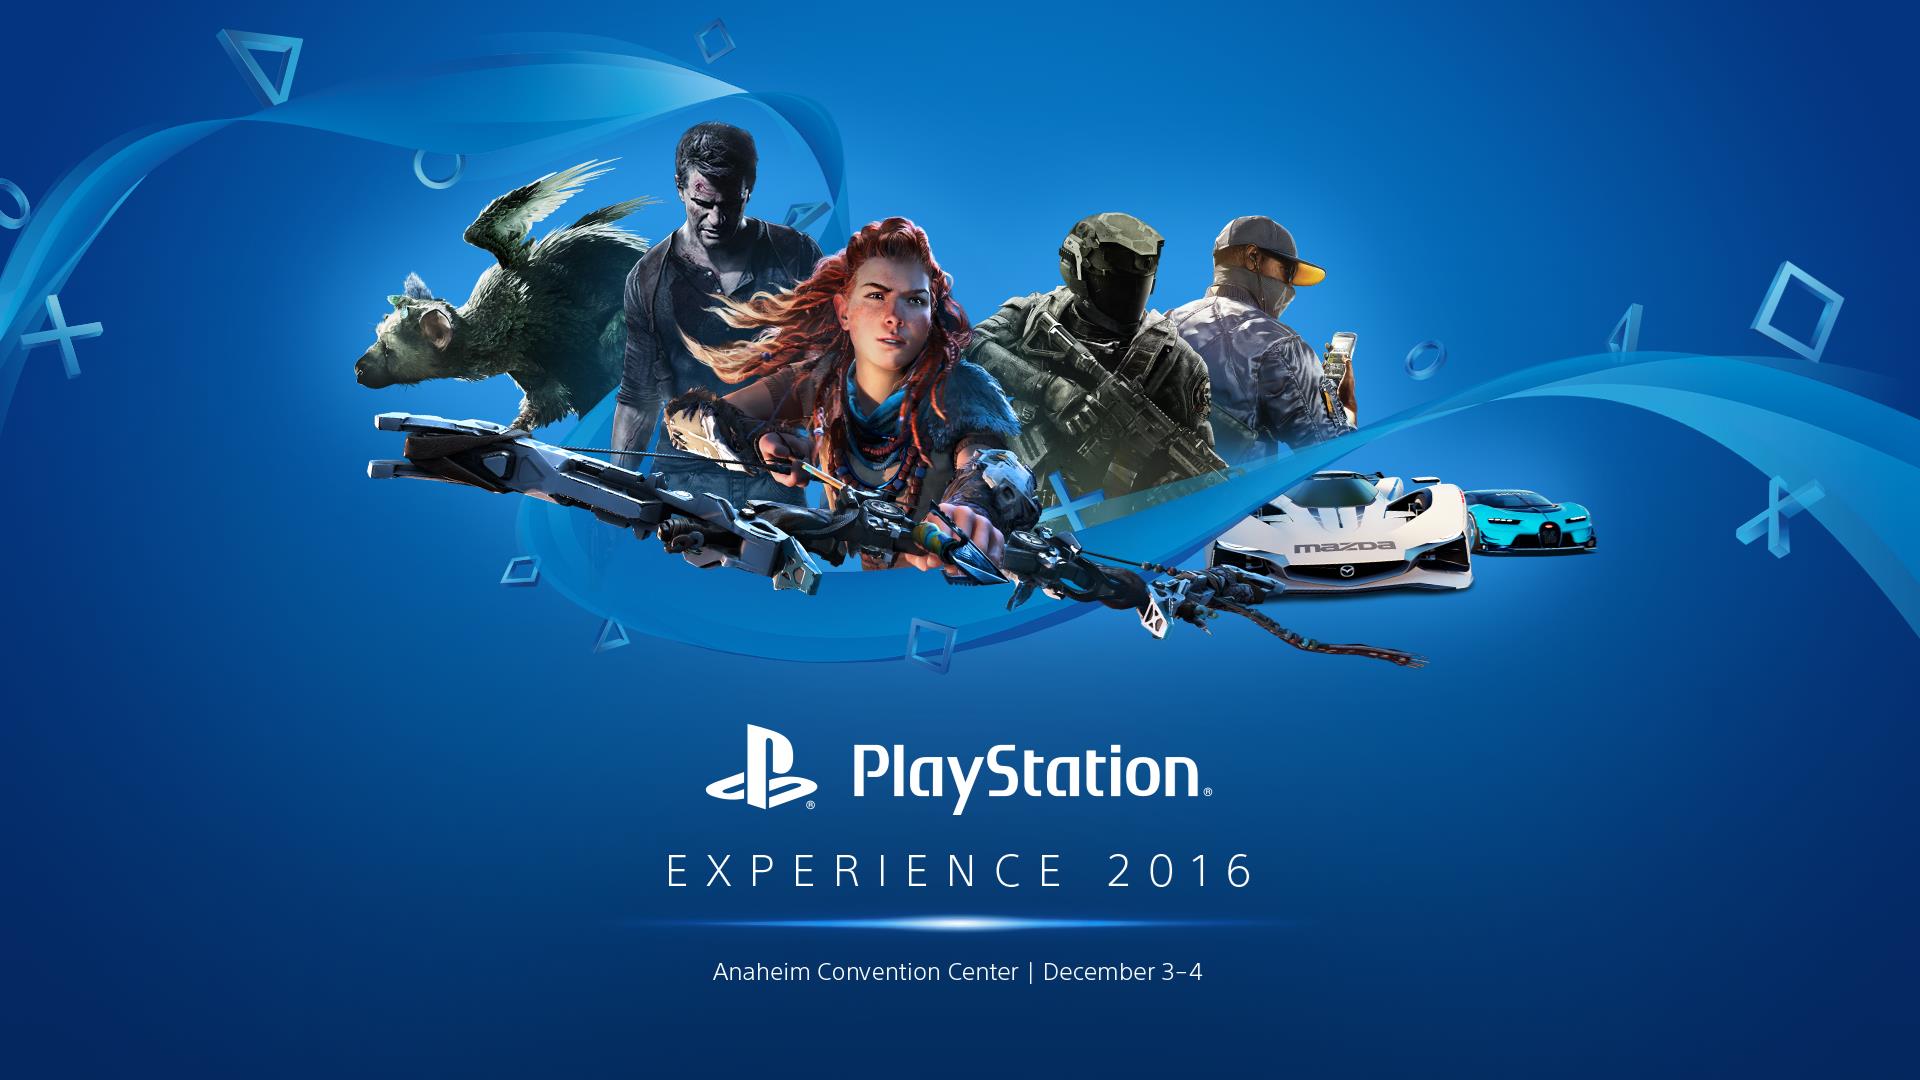 Top Shelf: Why The Playstation Experience Matters - Ep. 12